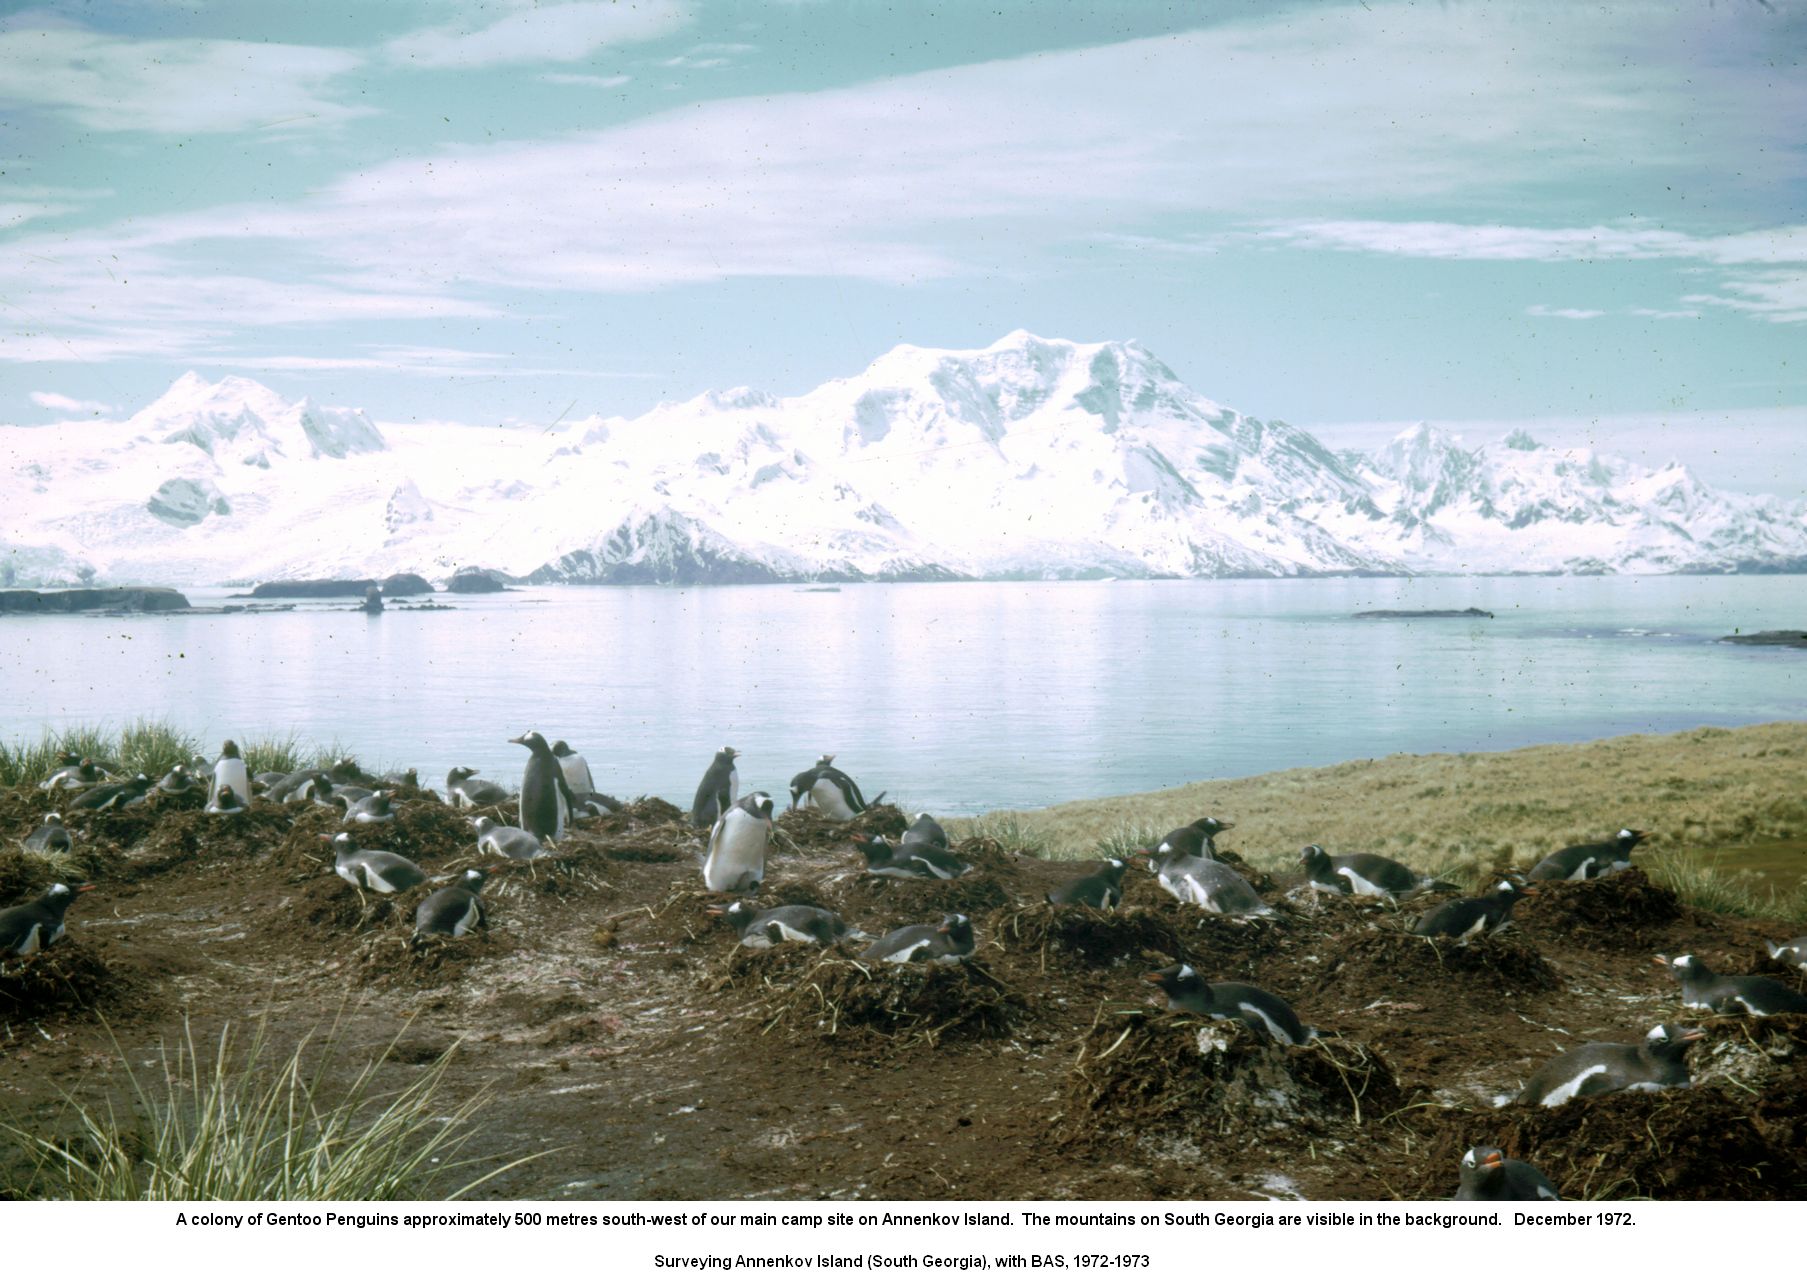 A colony of Gentoo Penguins approximately 500 metres south-west of our main camp site on Annenkov Island.  The mountains on South Georgia are visible in the background.   December 1972.